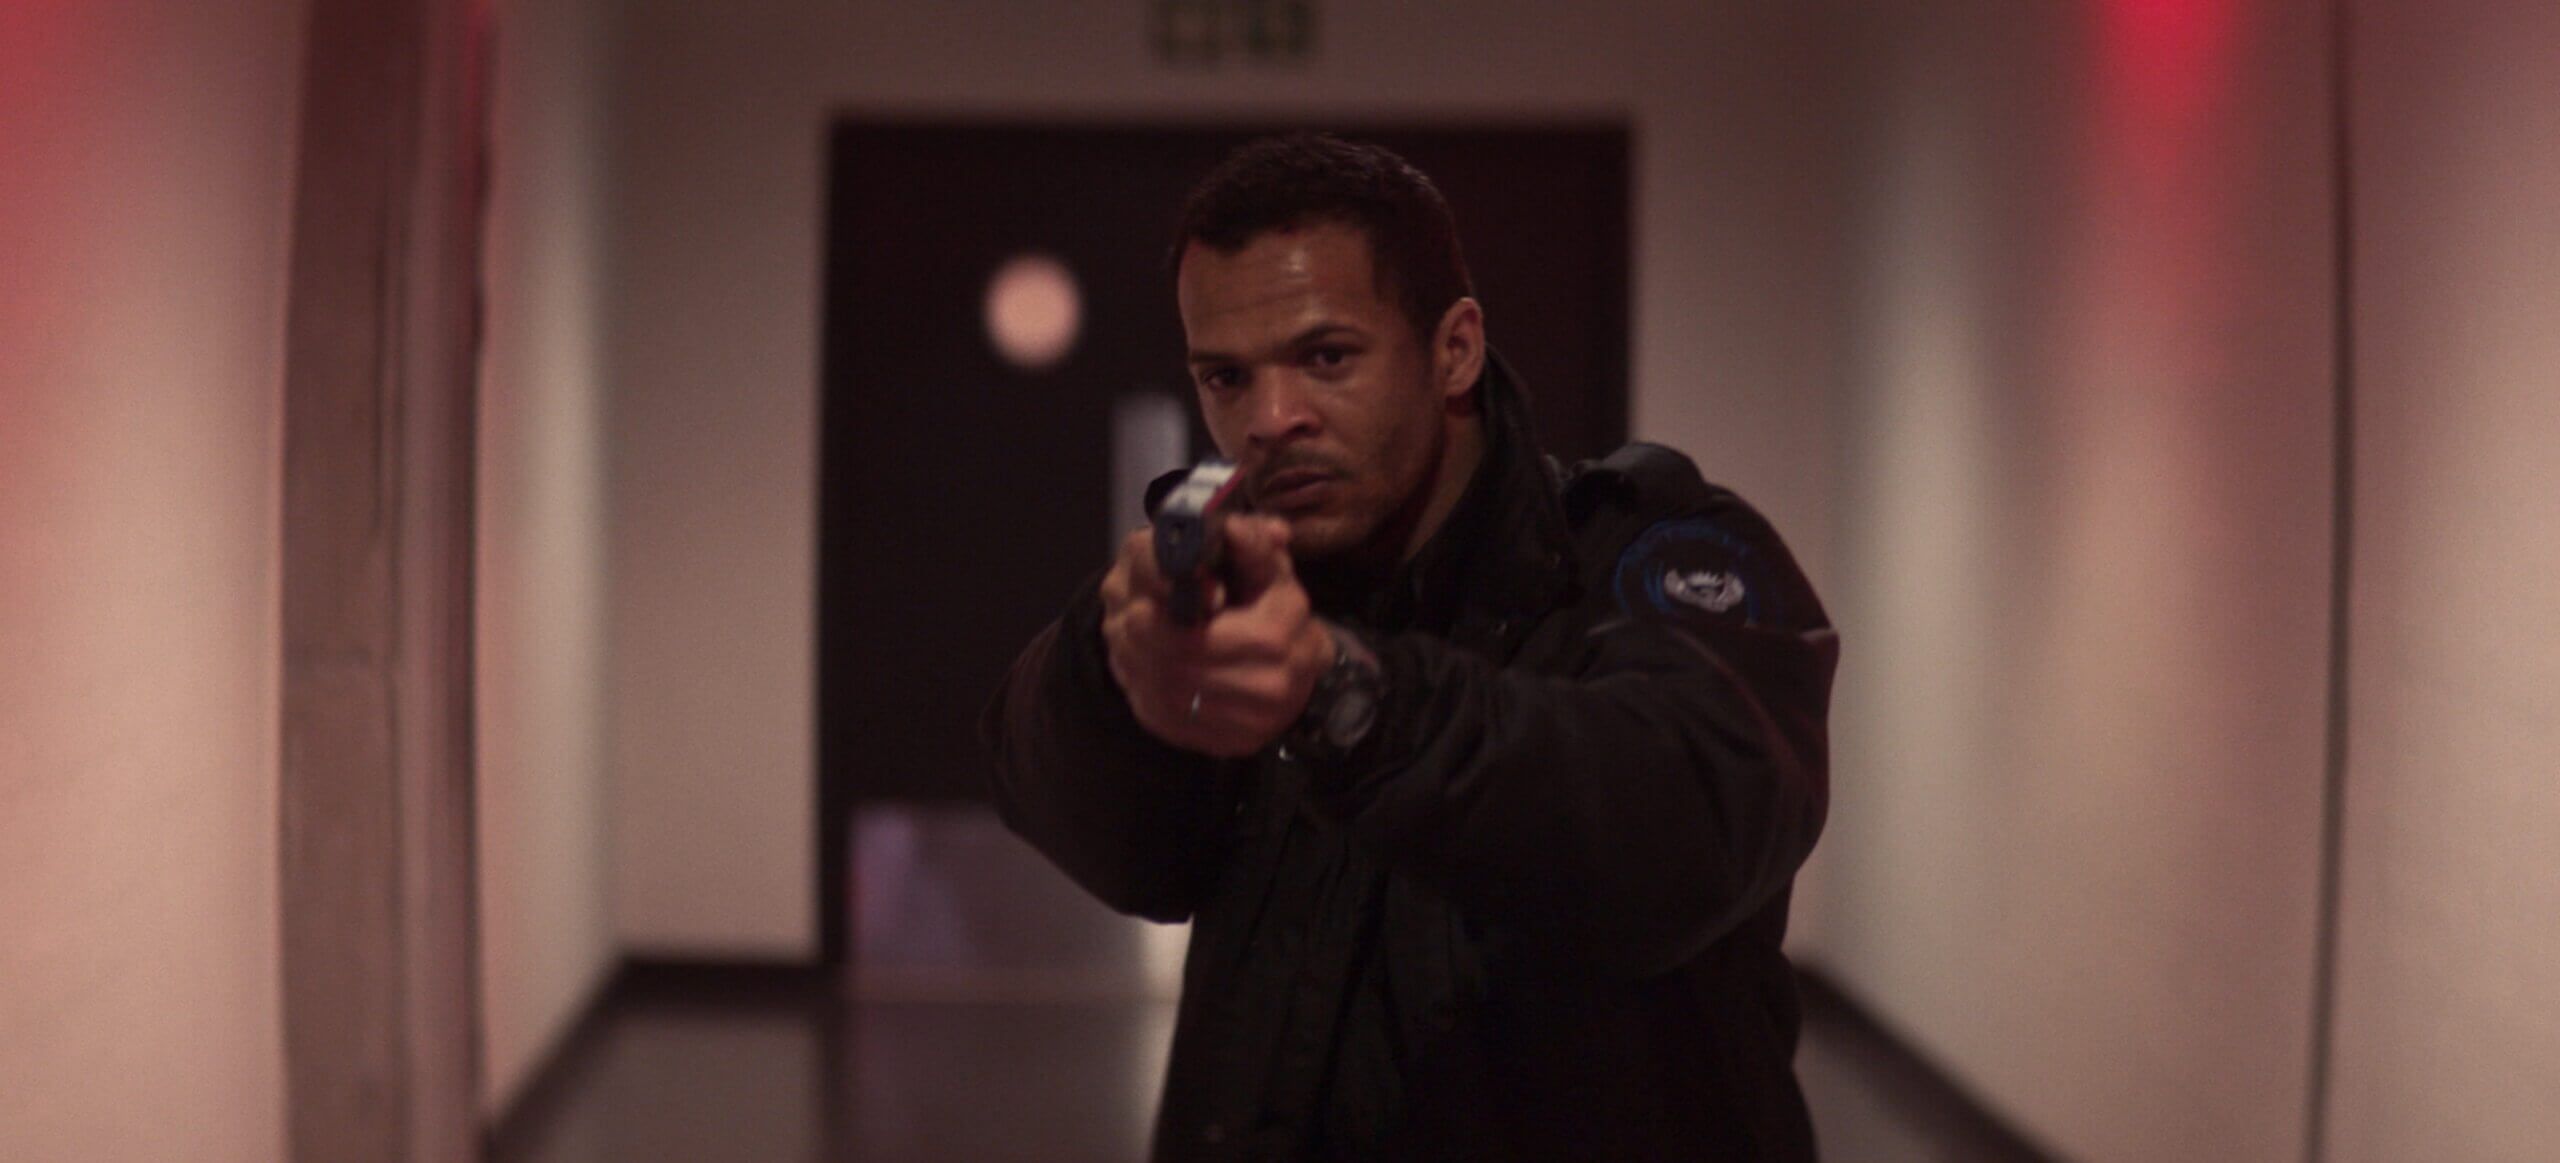 indemnity-trailer-south-african-action-thriller